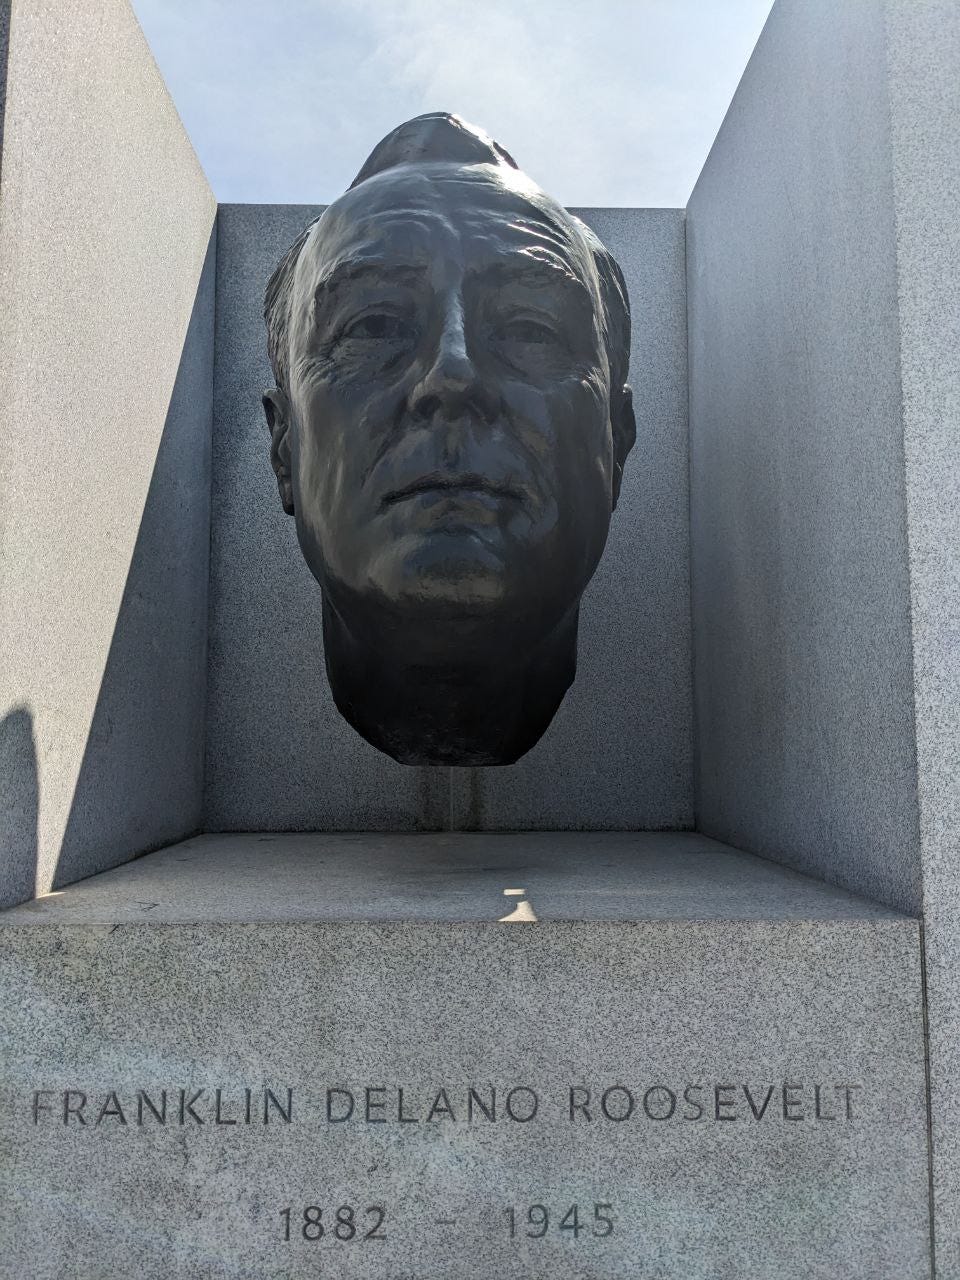 A bust of Franklin Delano Roosevelt. Below the name are the years 1882 - 1945